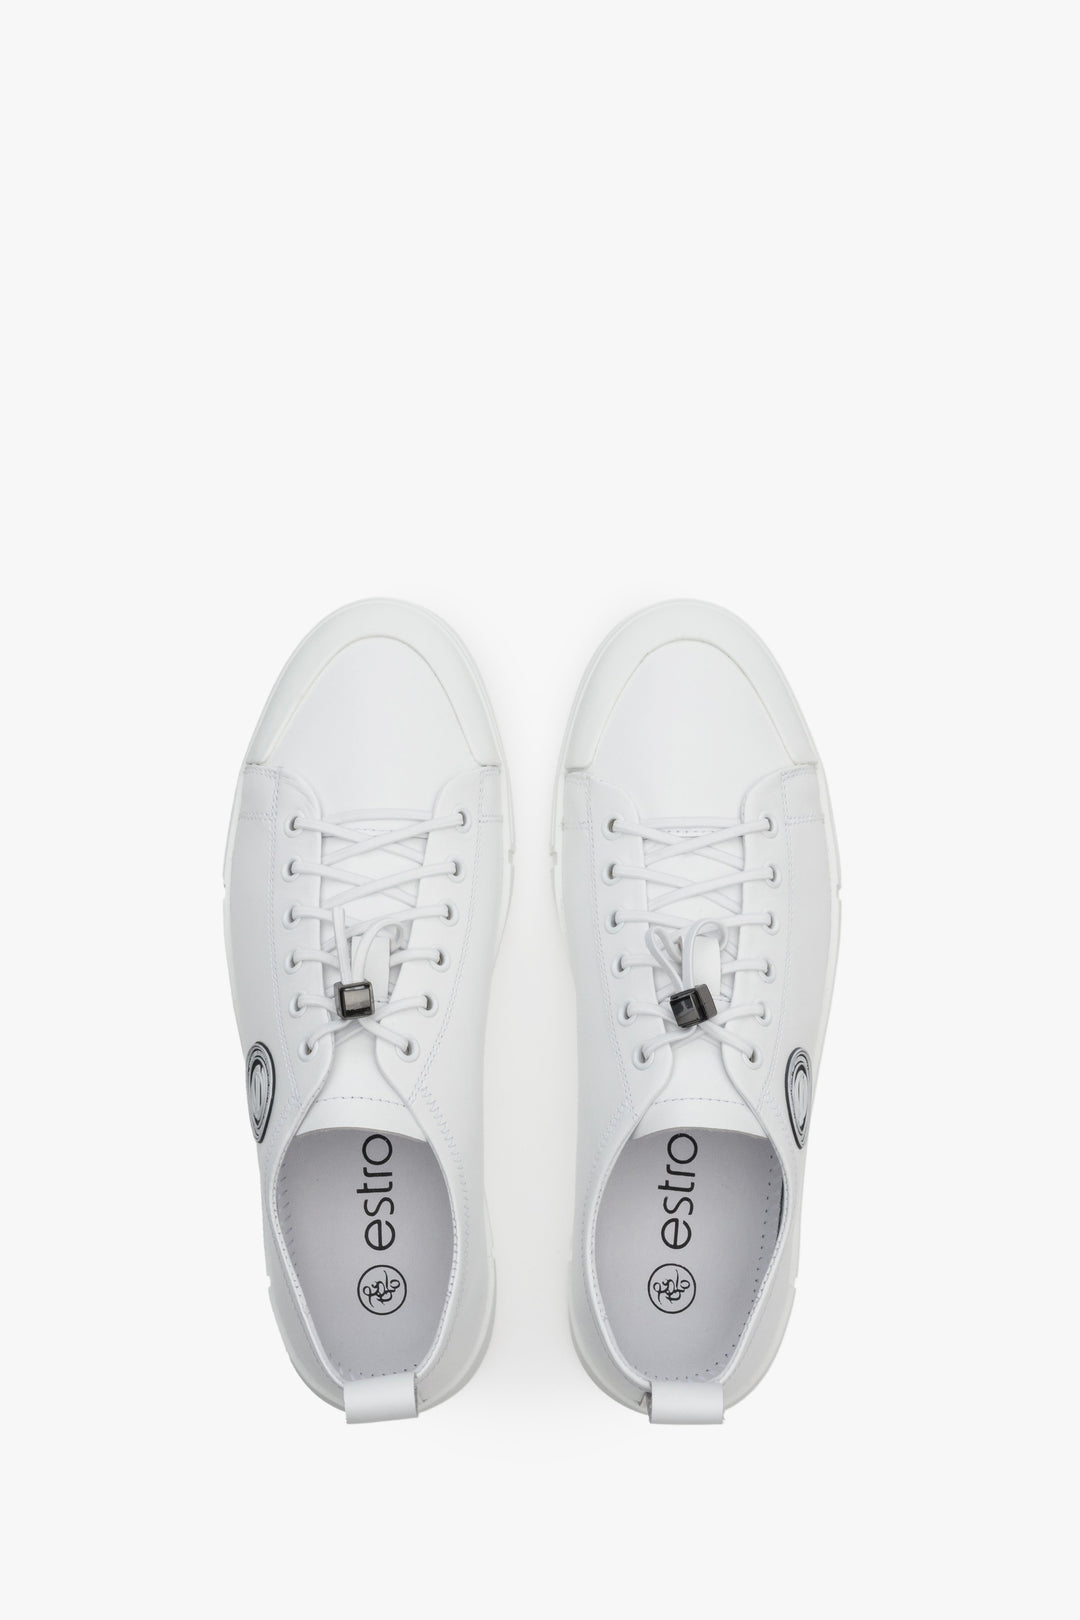 Estro men's sneakers in white made of genuine leather - top view presentation of the footwear.